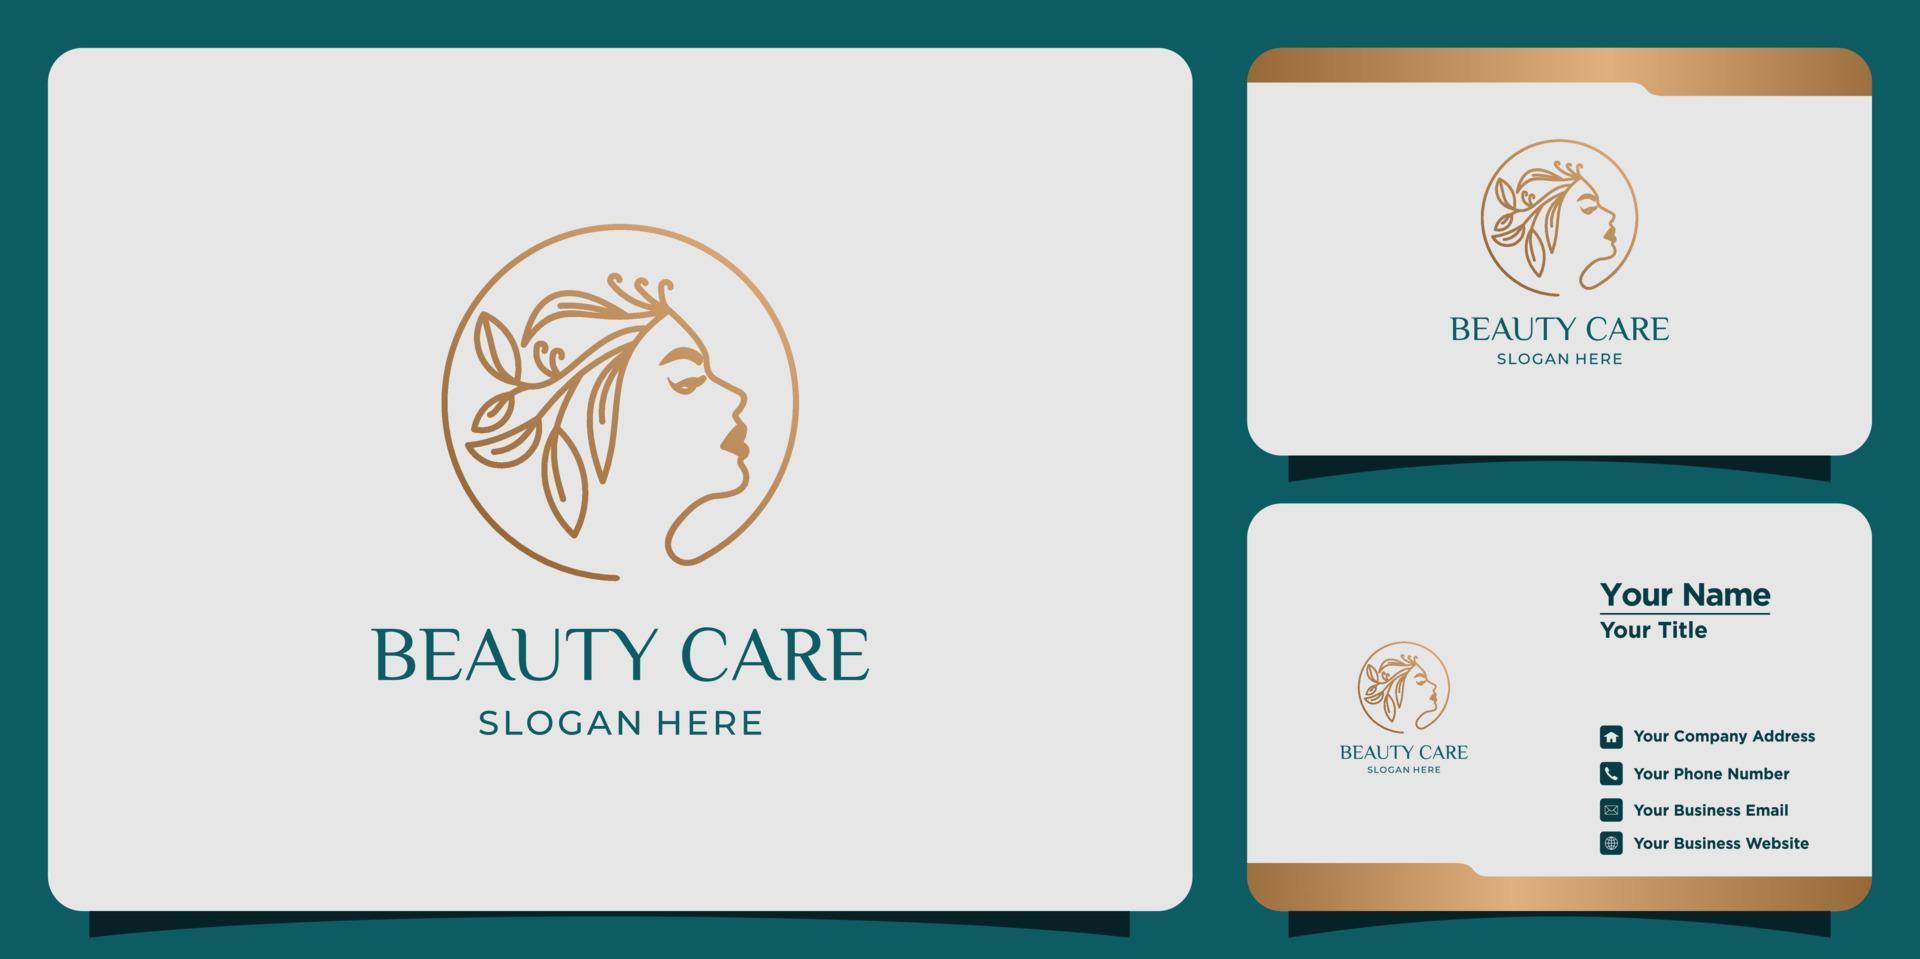 minimalist beauty abstract logo salon and spa silhouette shape concept logo and business card template vector